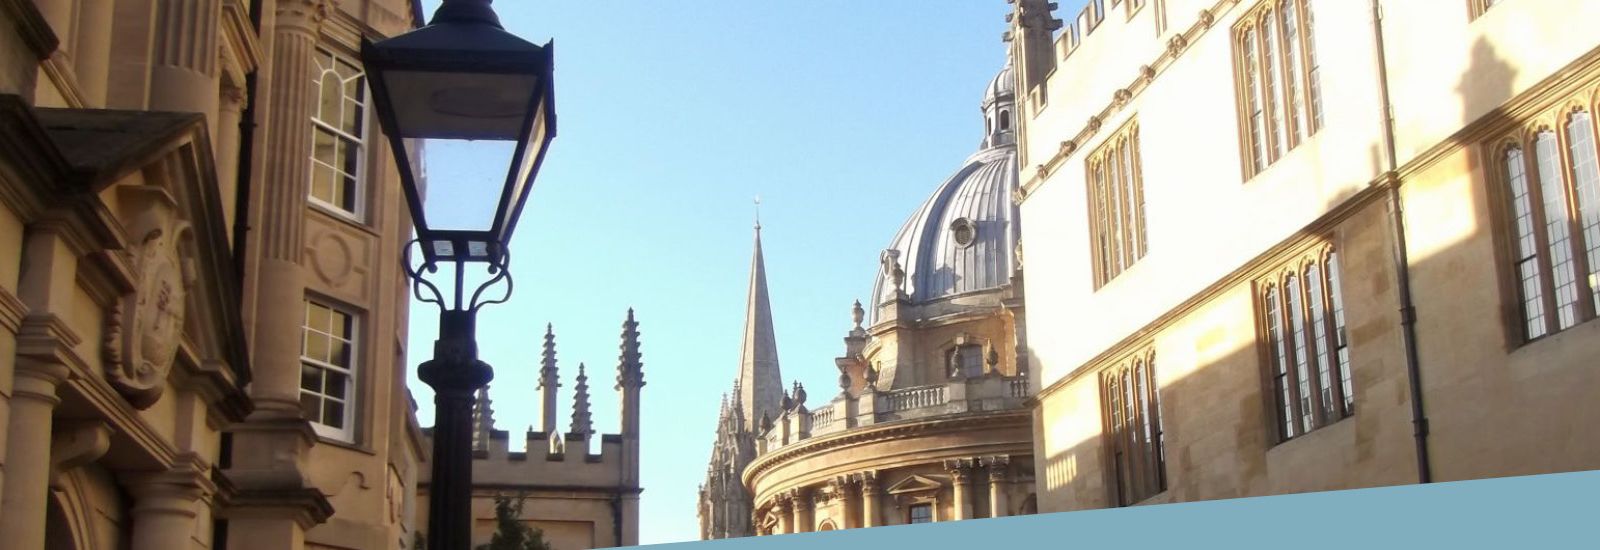 Looking down Catte Street with Hertford college on the left, the domed top of the Radcliffe Camera library in the centre and the Bodleain library on the right.